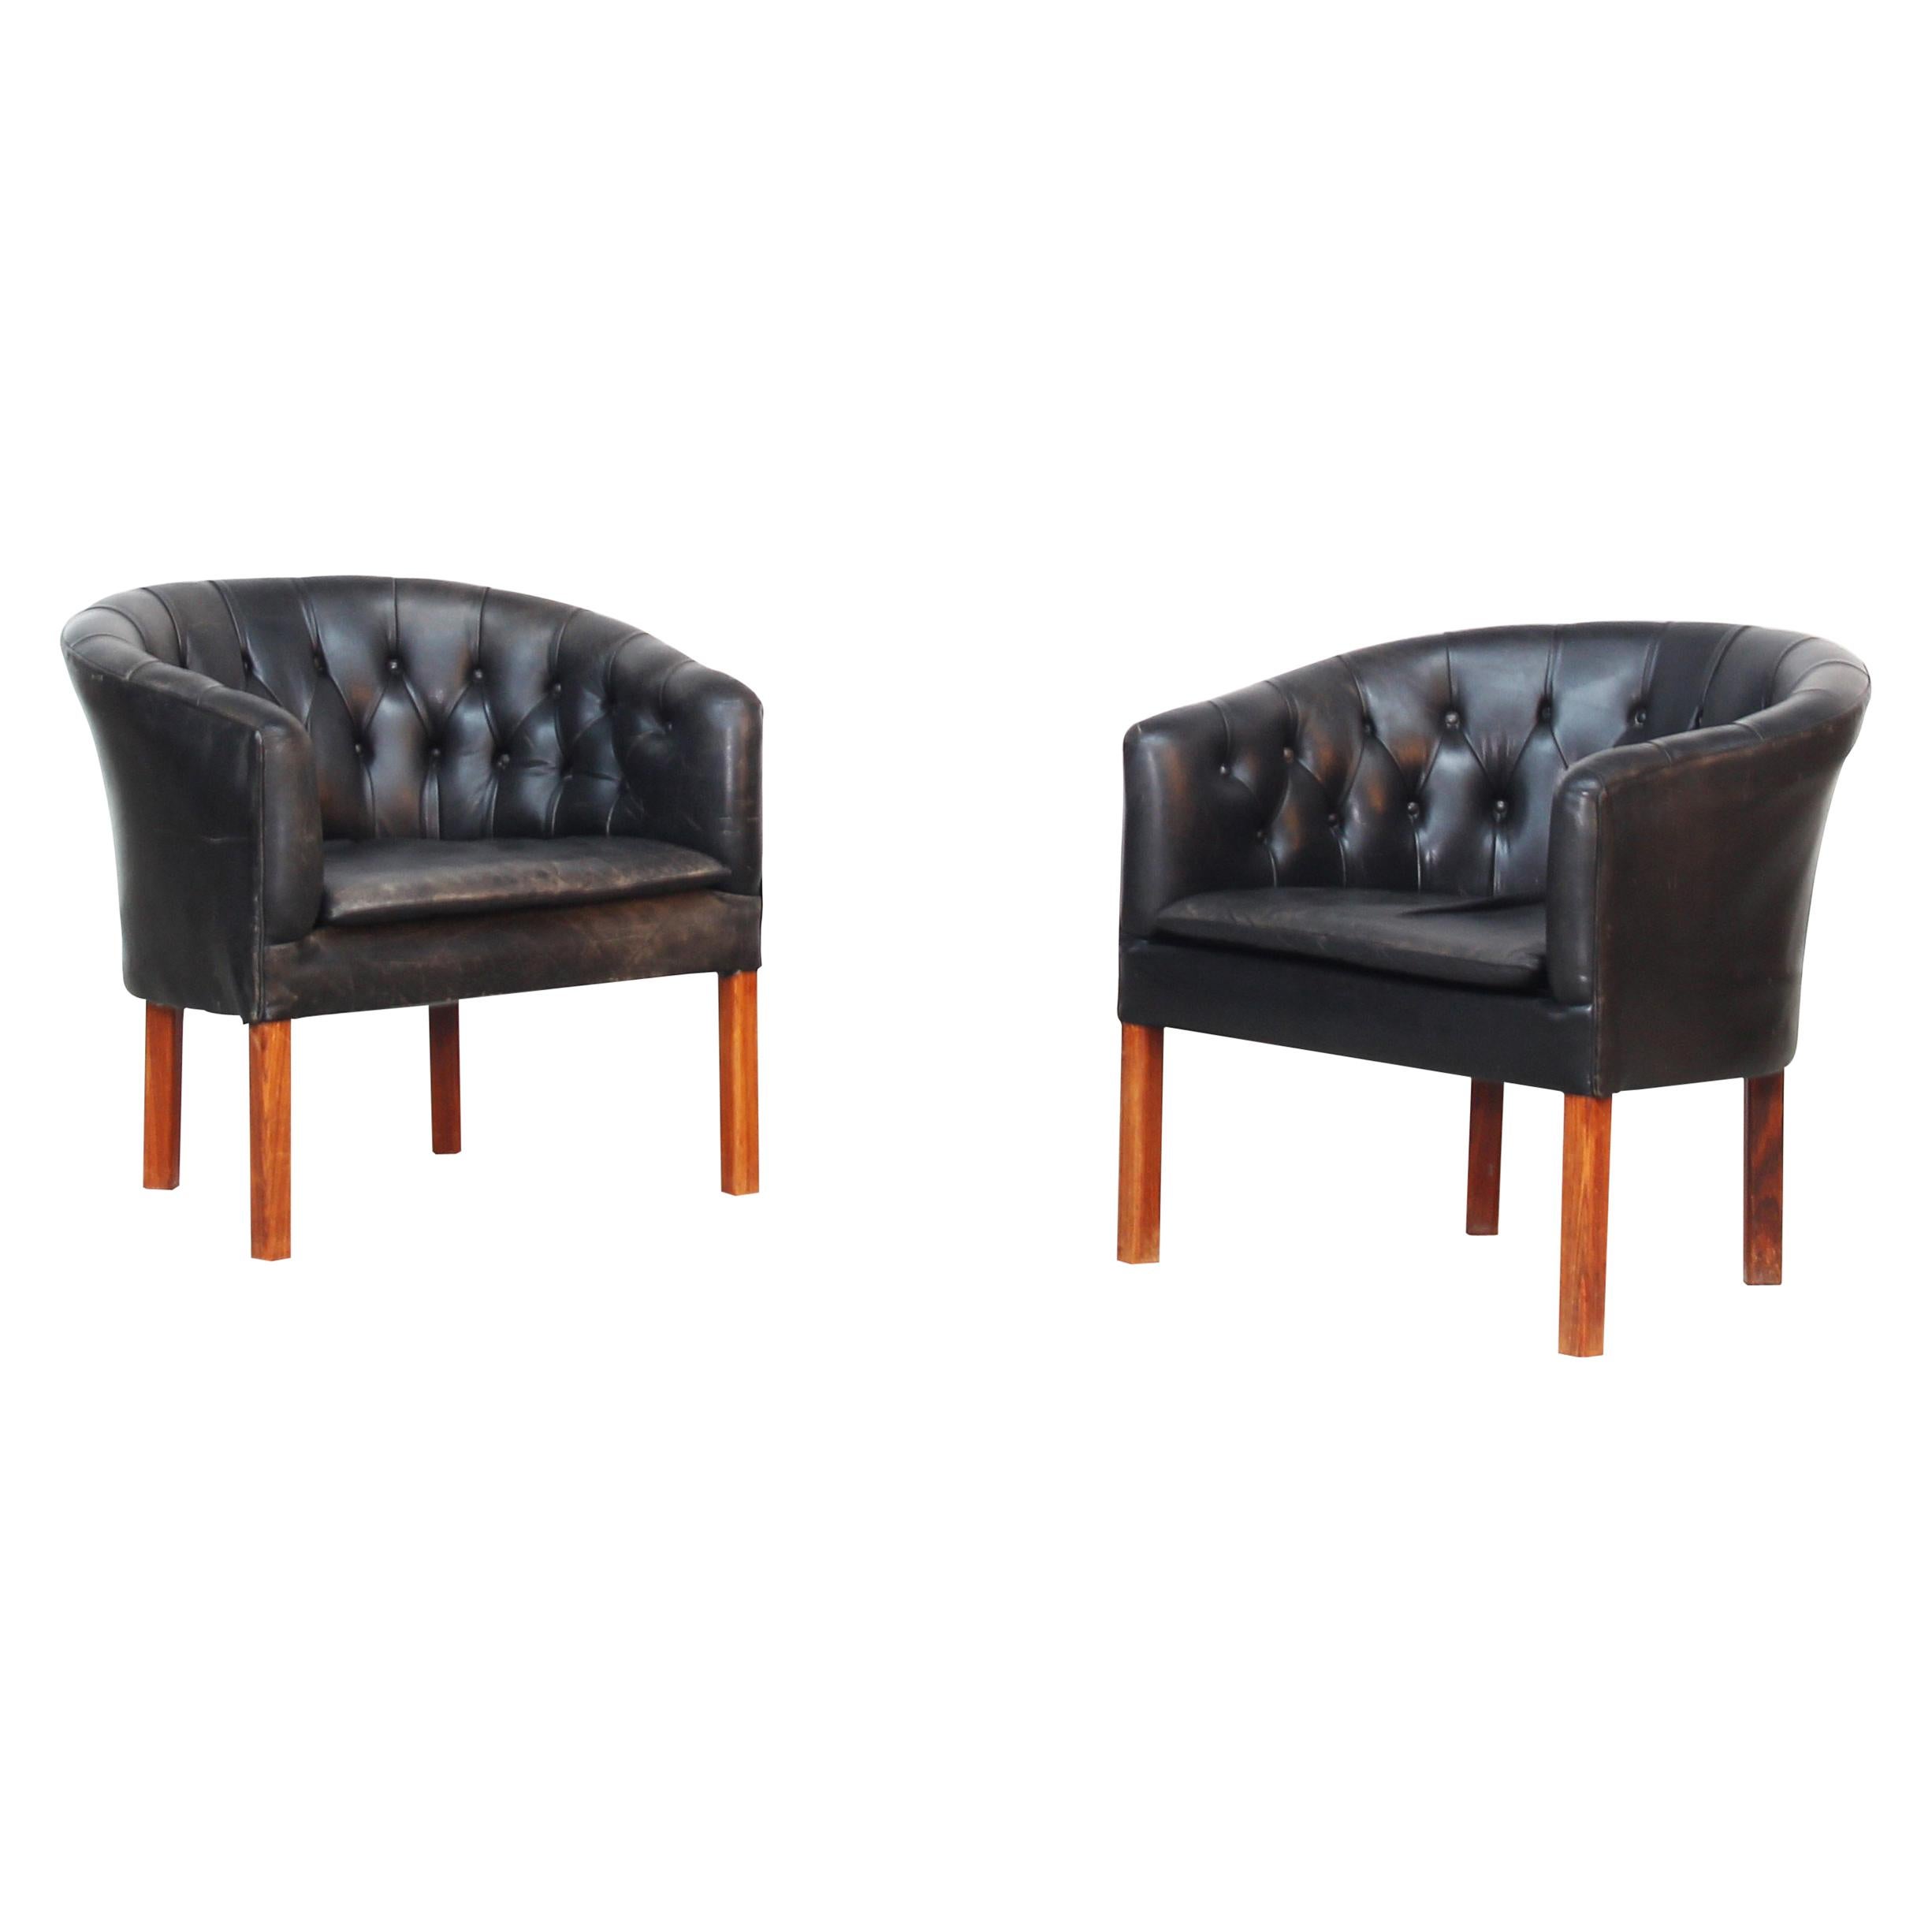 Pair of Tufted Danish Lounge Chairs Attributed to Kaare Klint Borge Mogensen For Sale